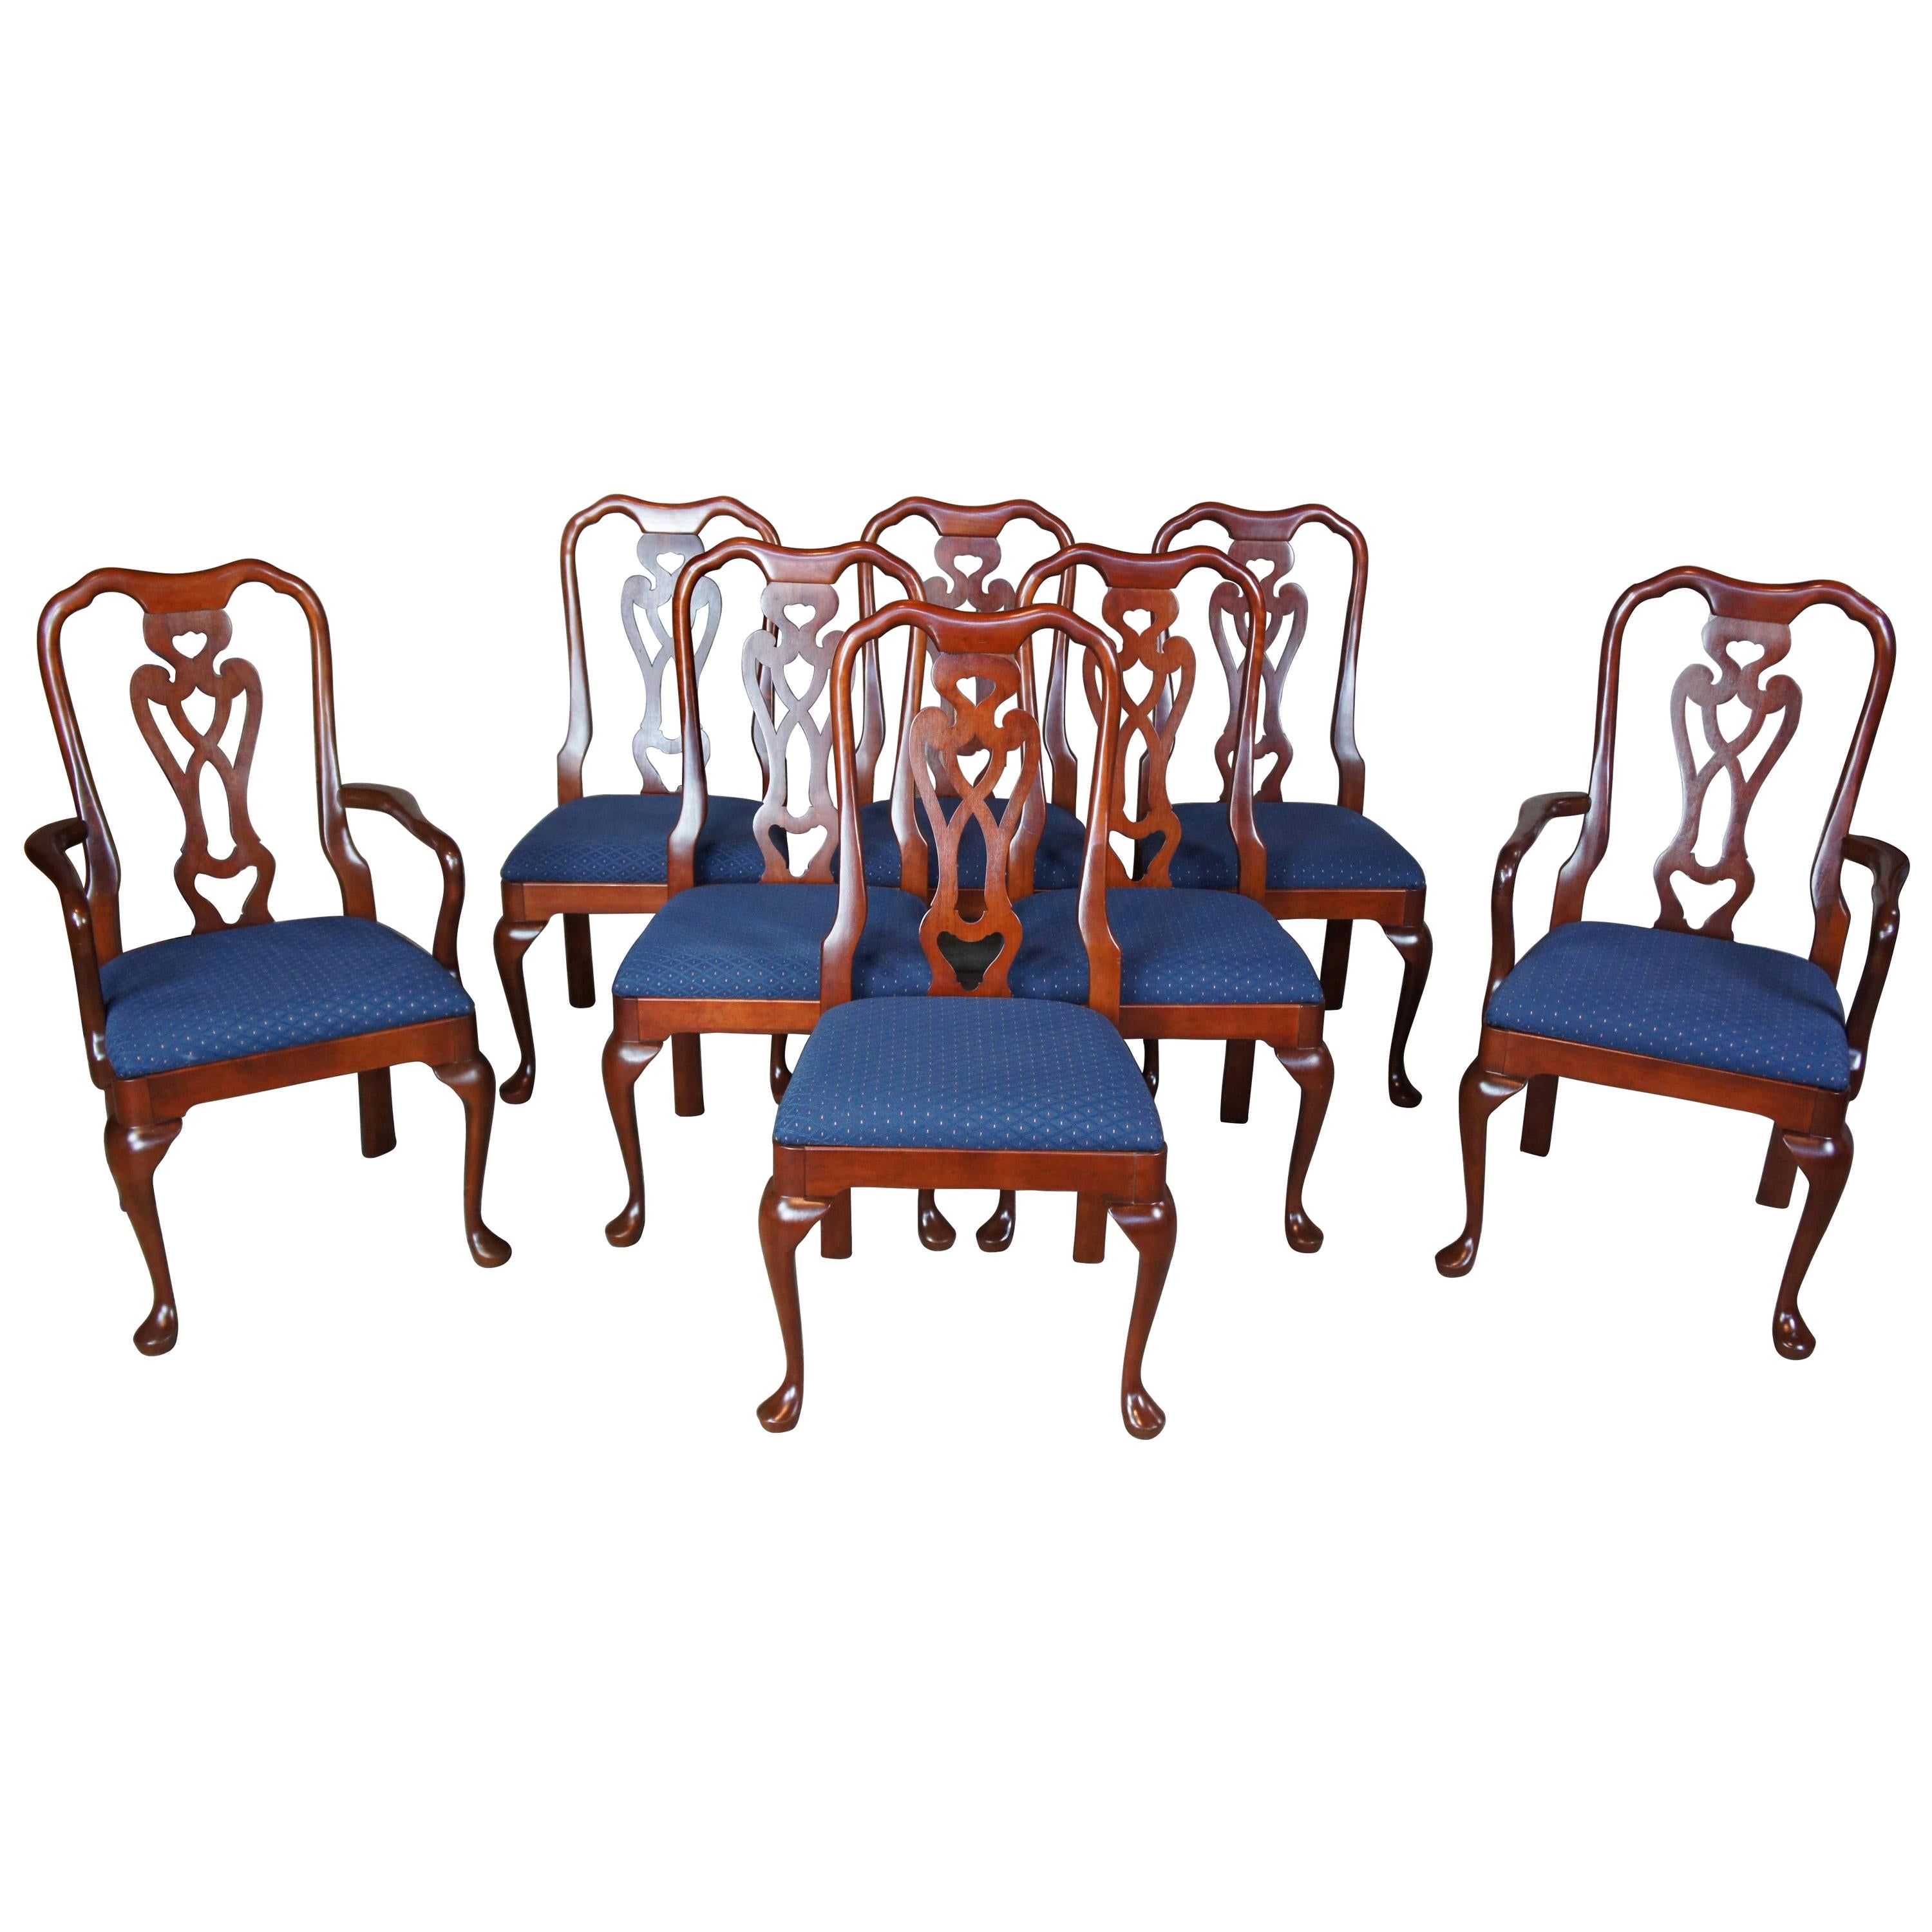 Pennsylvania House Queen Anne Solid Cherry Dining Room Chairs Blue Set of 8